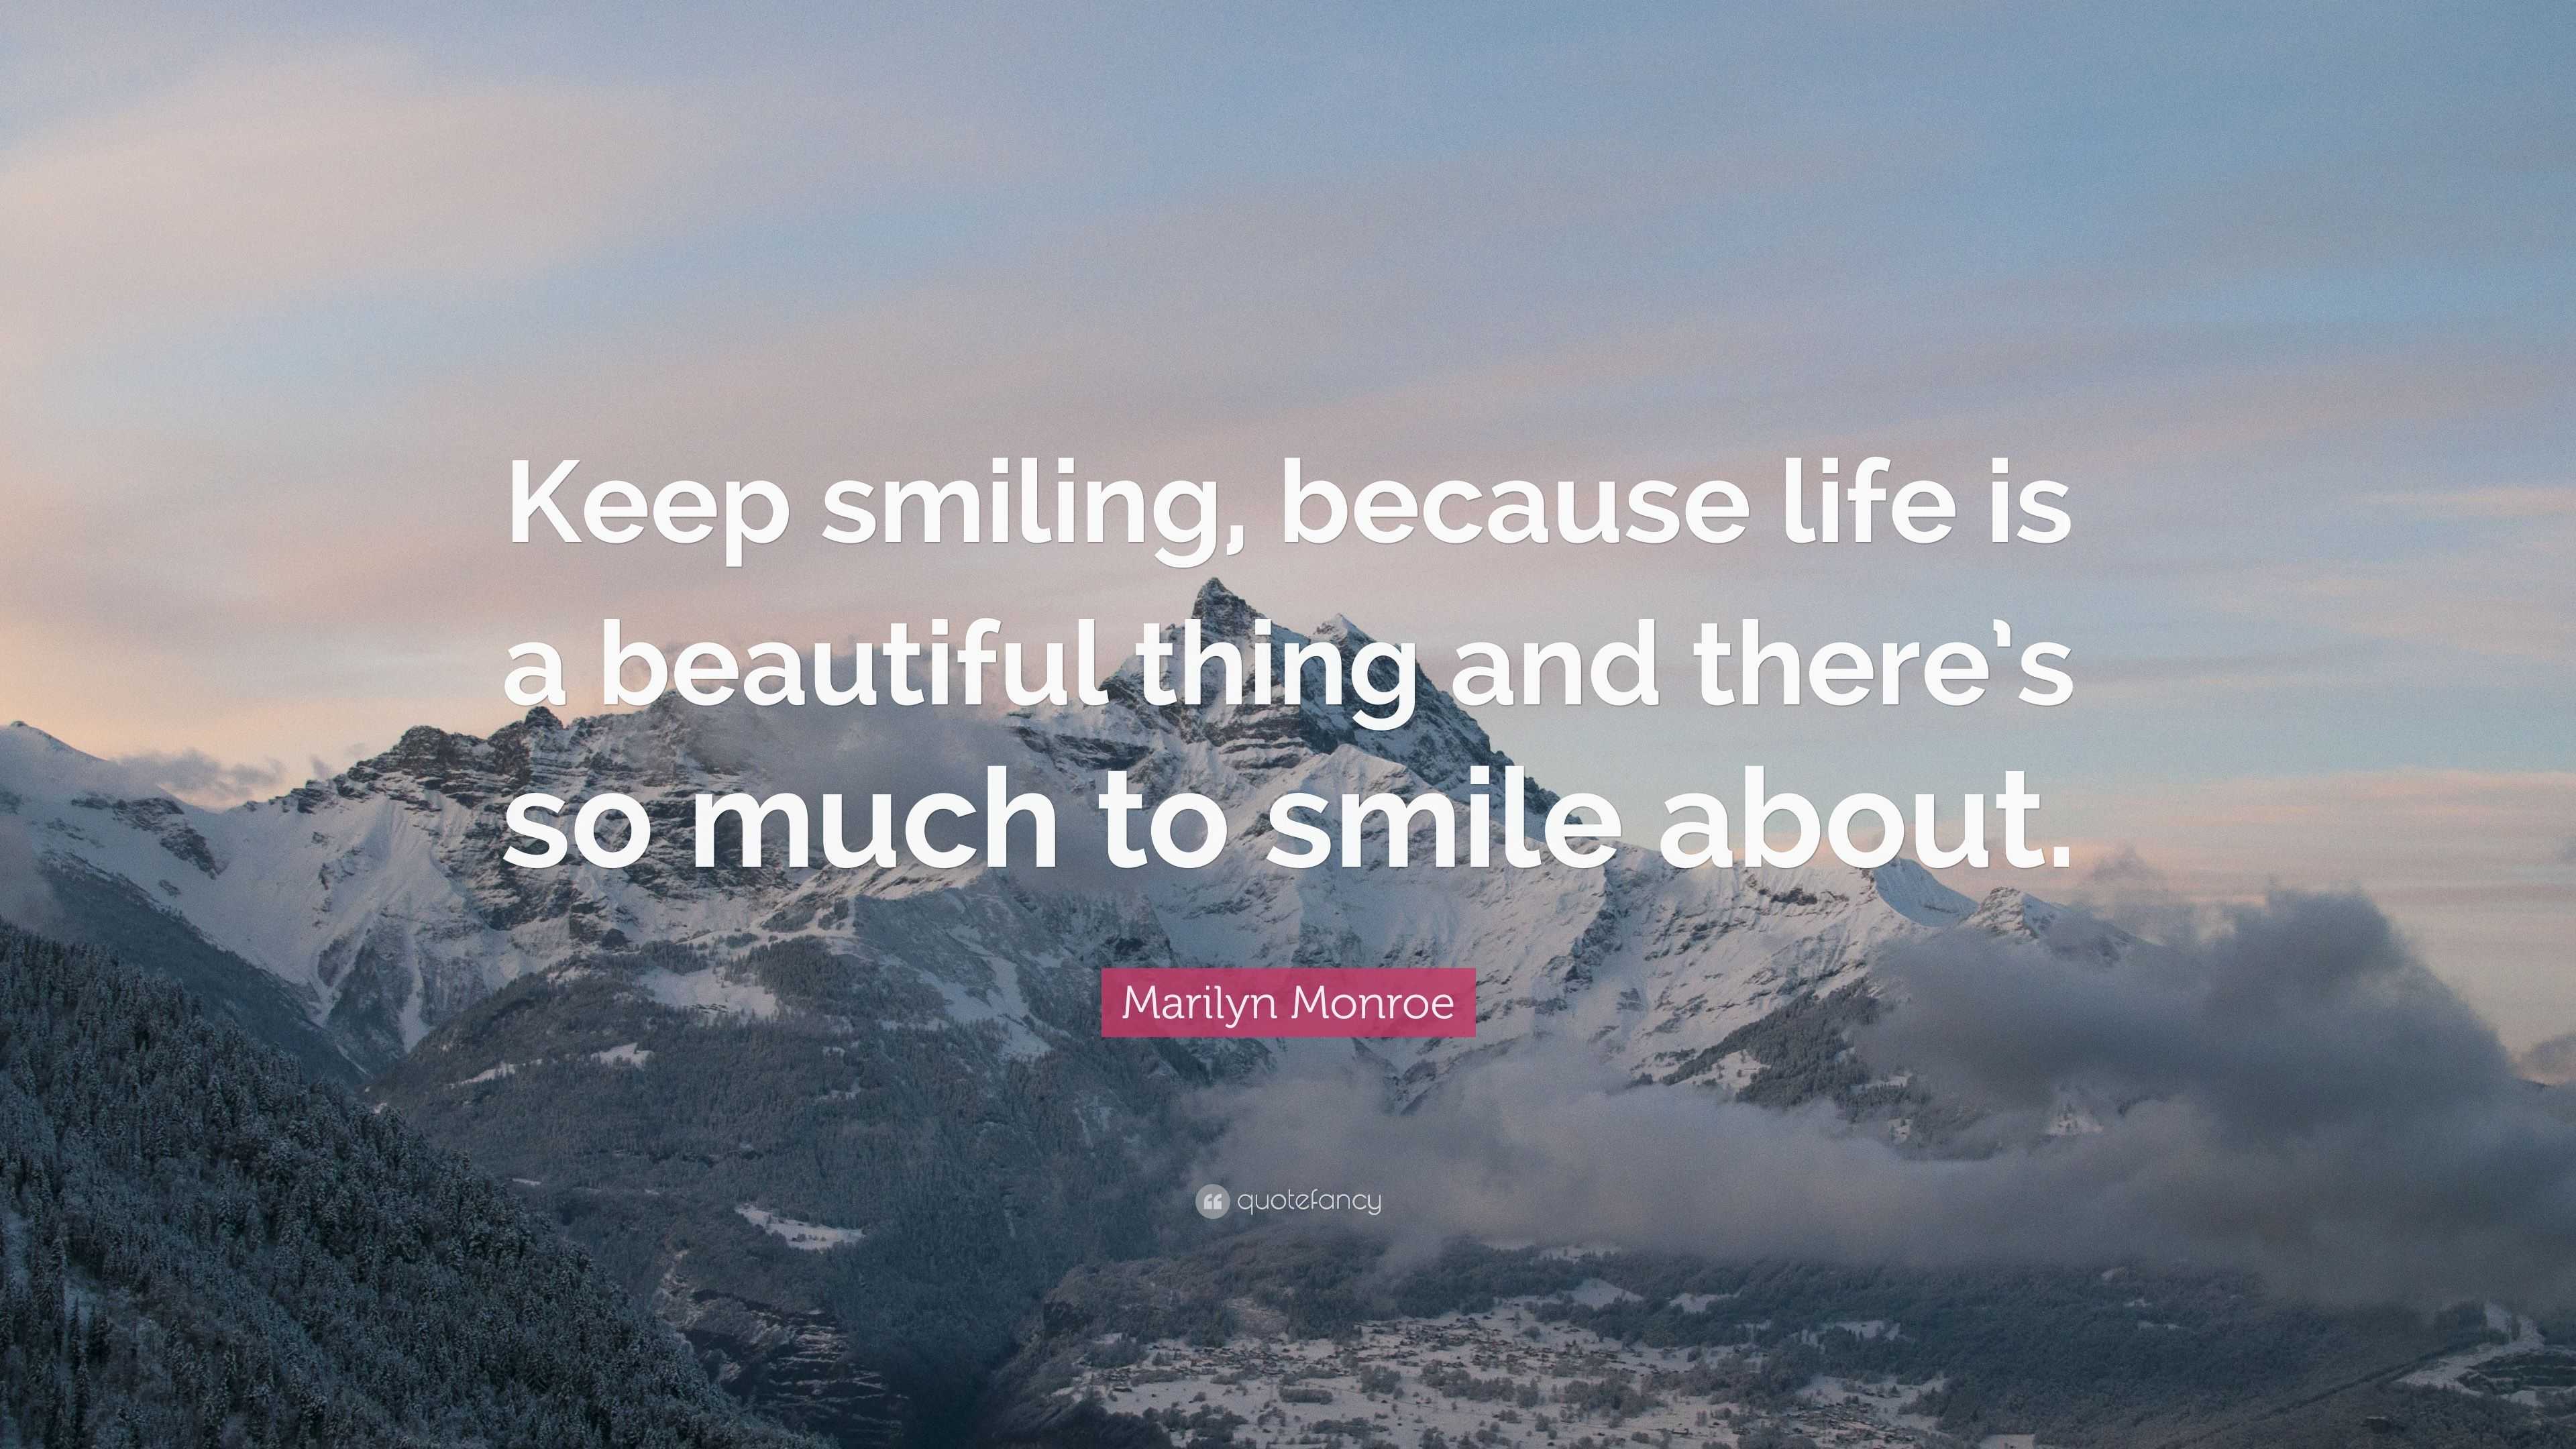 Marilyn Monroe Quote “Keep smiling, because life is a